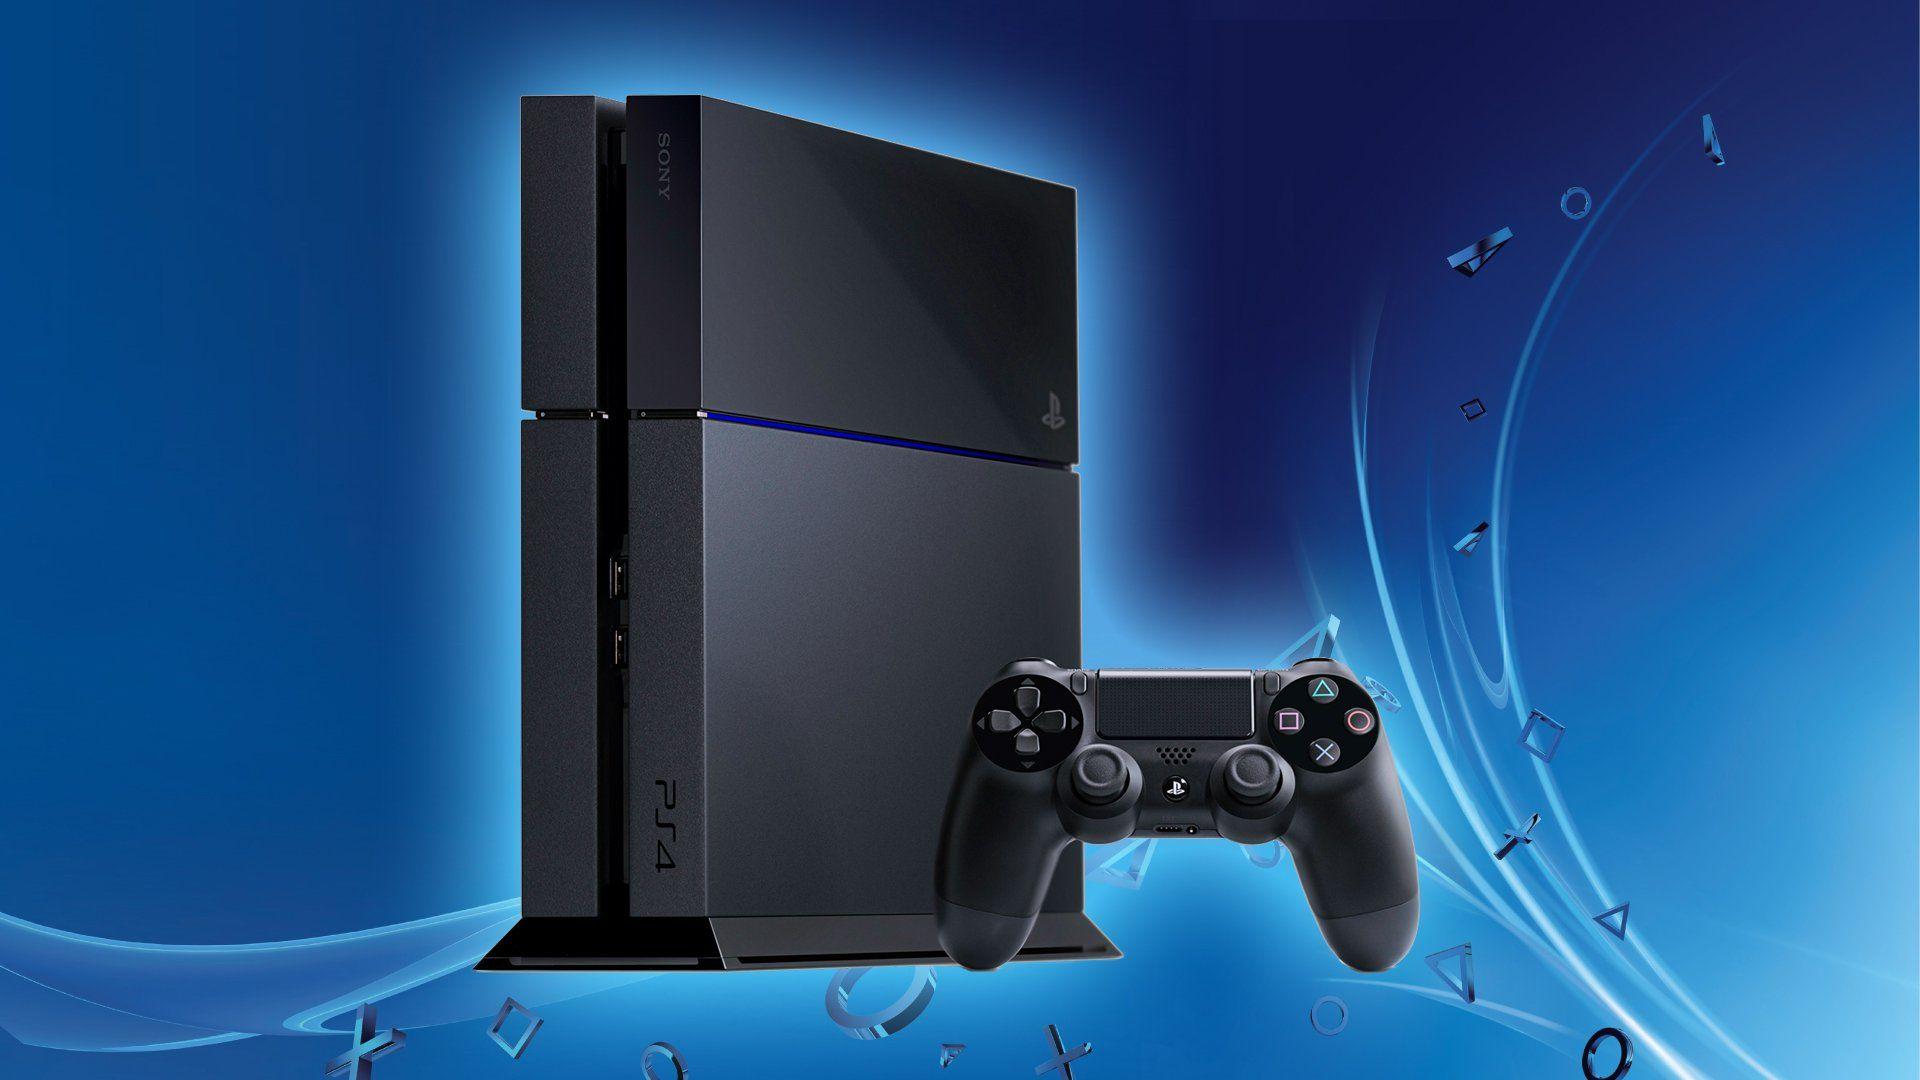 PlayStation CEO John Kodera: PS4 is at the End of its Console Life